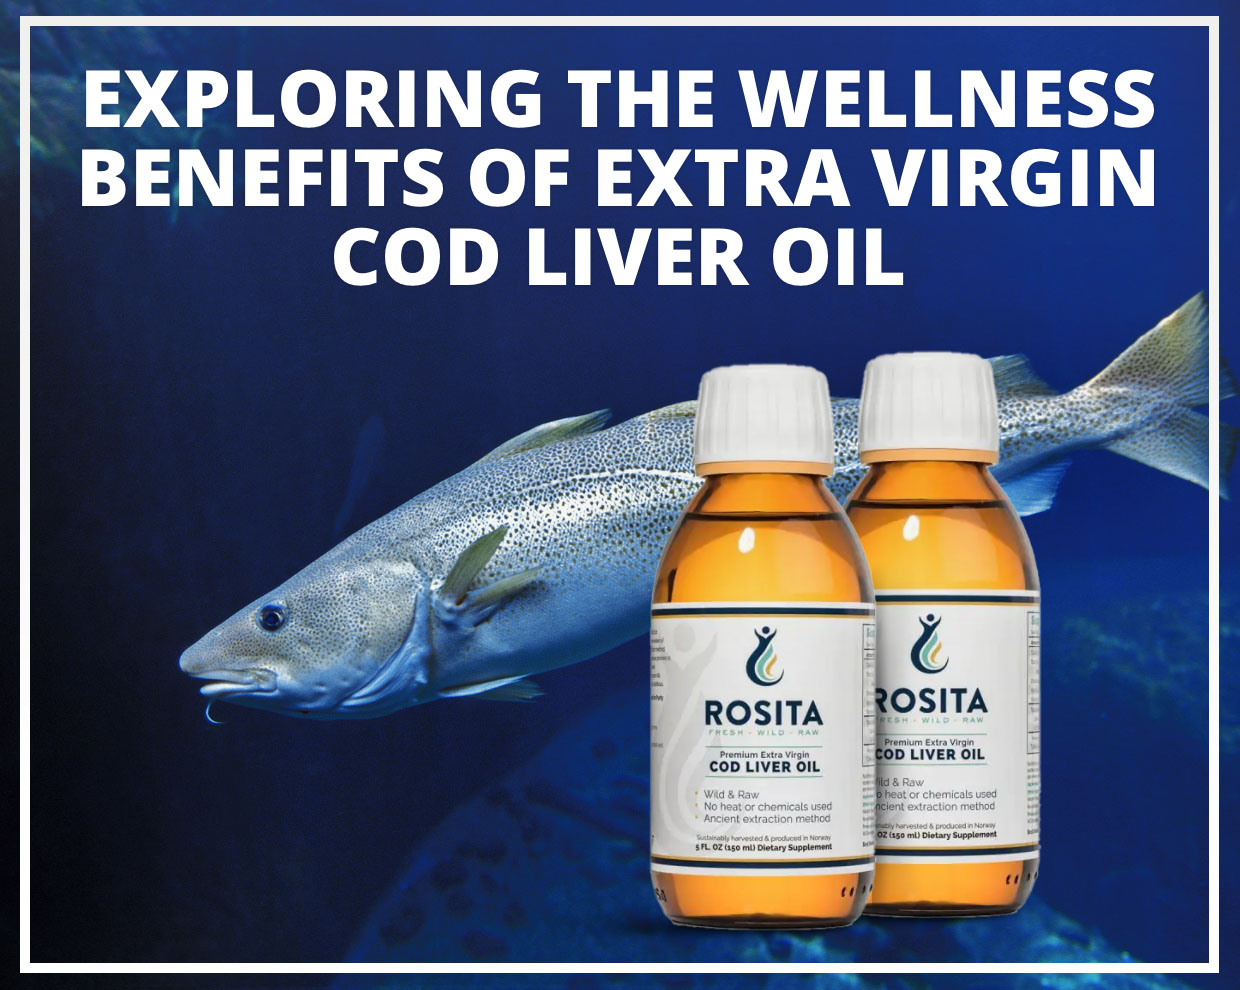 Exploring the Wellness Benefits of Extra Virgin Cod Liver Oil